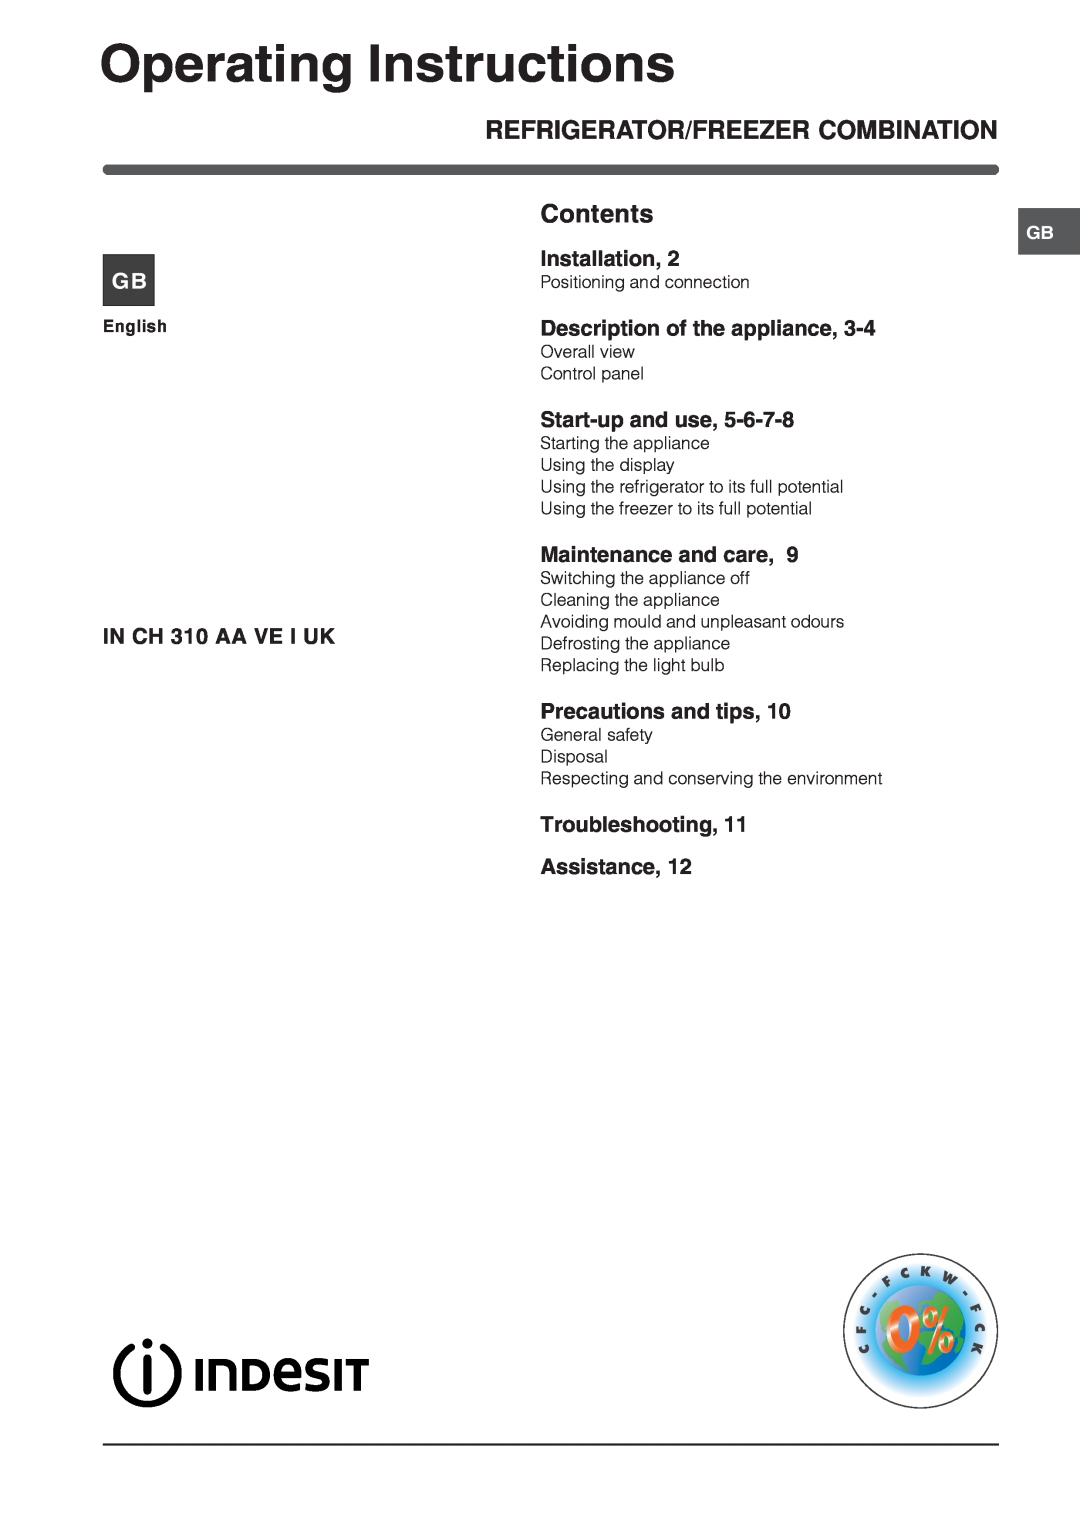 Indesit IN CH 310 AA VE I UK manual Operating Instructions, Installation, Description of the appliance, Start-up and use 